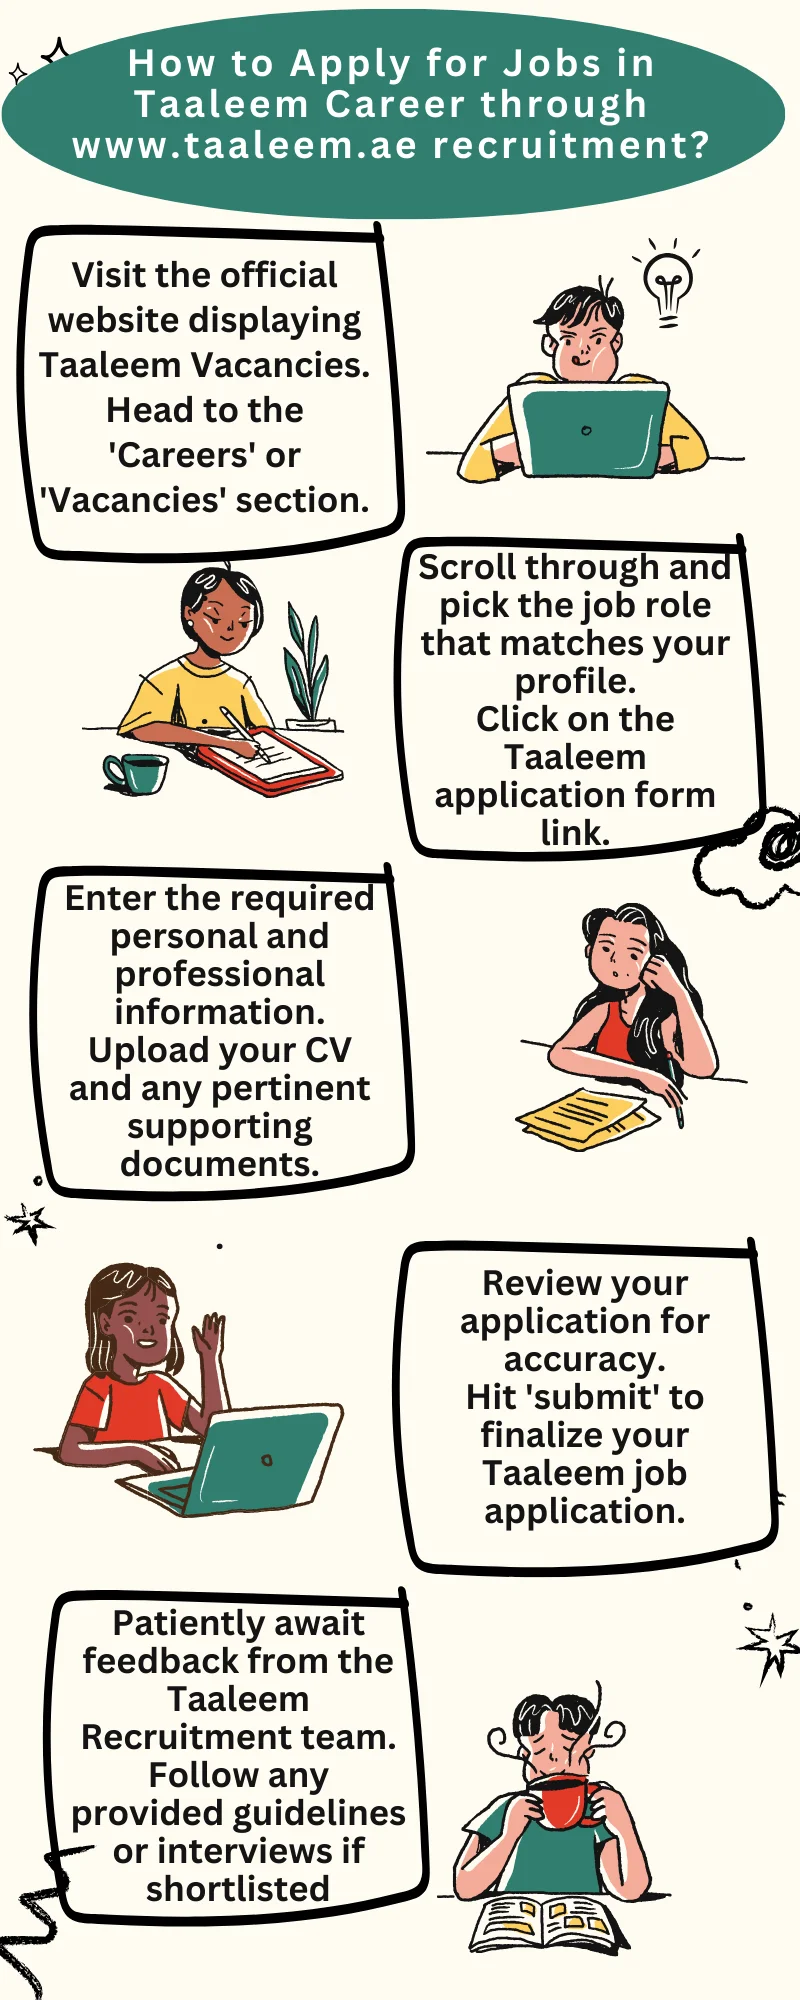 How to Apply for Jobs in Taaleem Career through www.taaleem.ae recruitment_